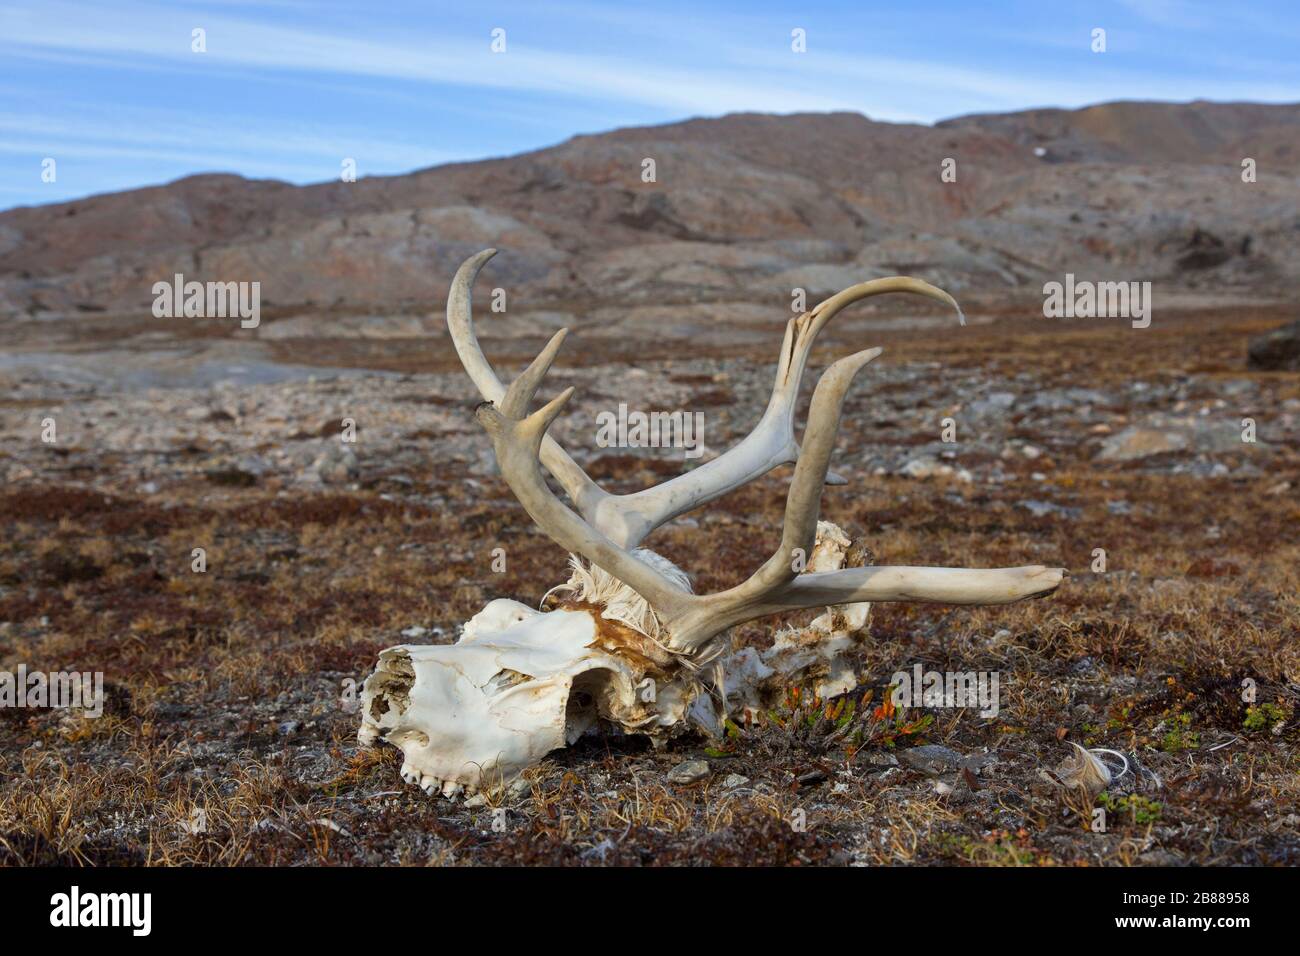 Svalbard reindeer (Rangifer tarandus platyrhynchus), close-up of skull with bleached antlers on the tundra in autumn, Spitsbergen, Norway Stock Photo